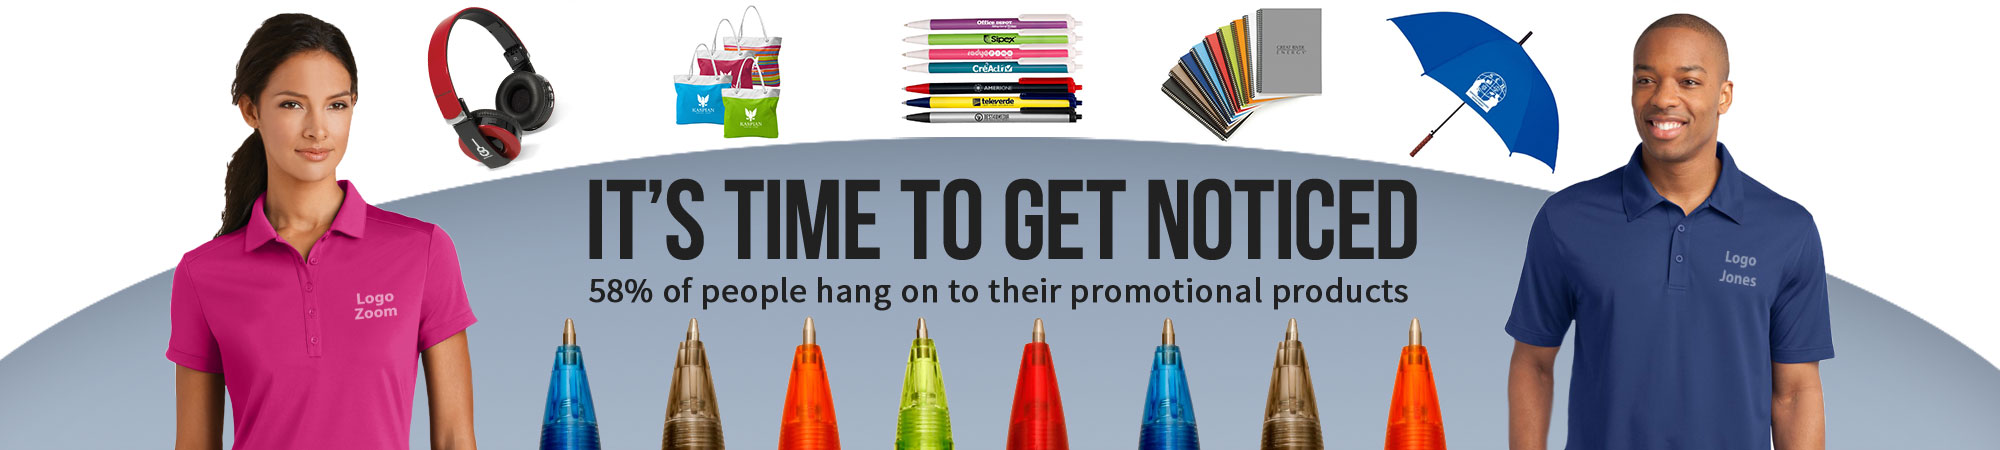 promotional-products-banner